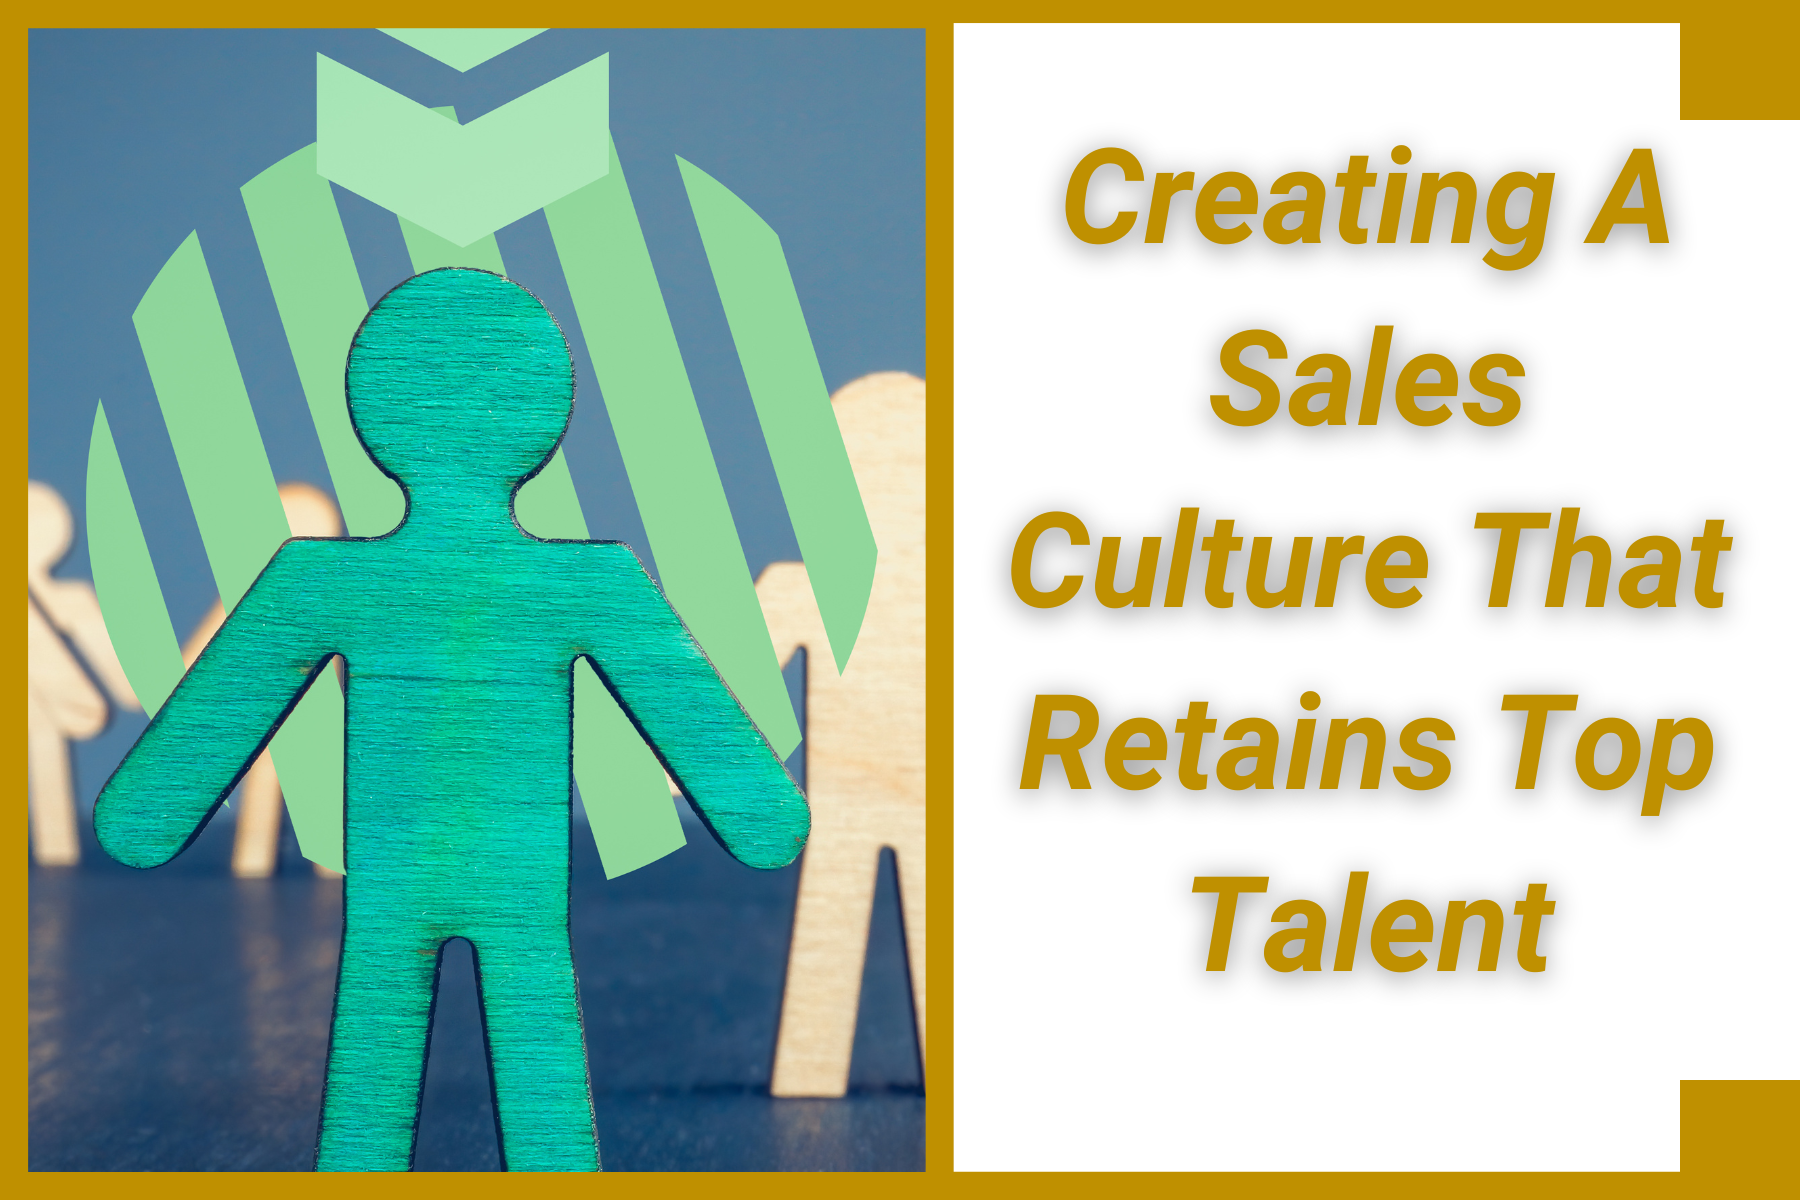 Creating A Sales Culture That Retains Top Talent